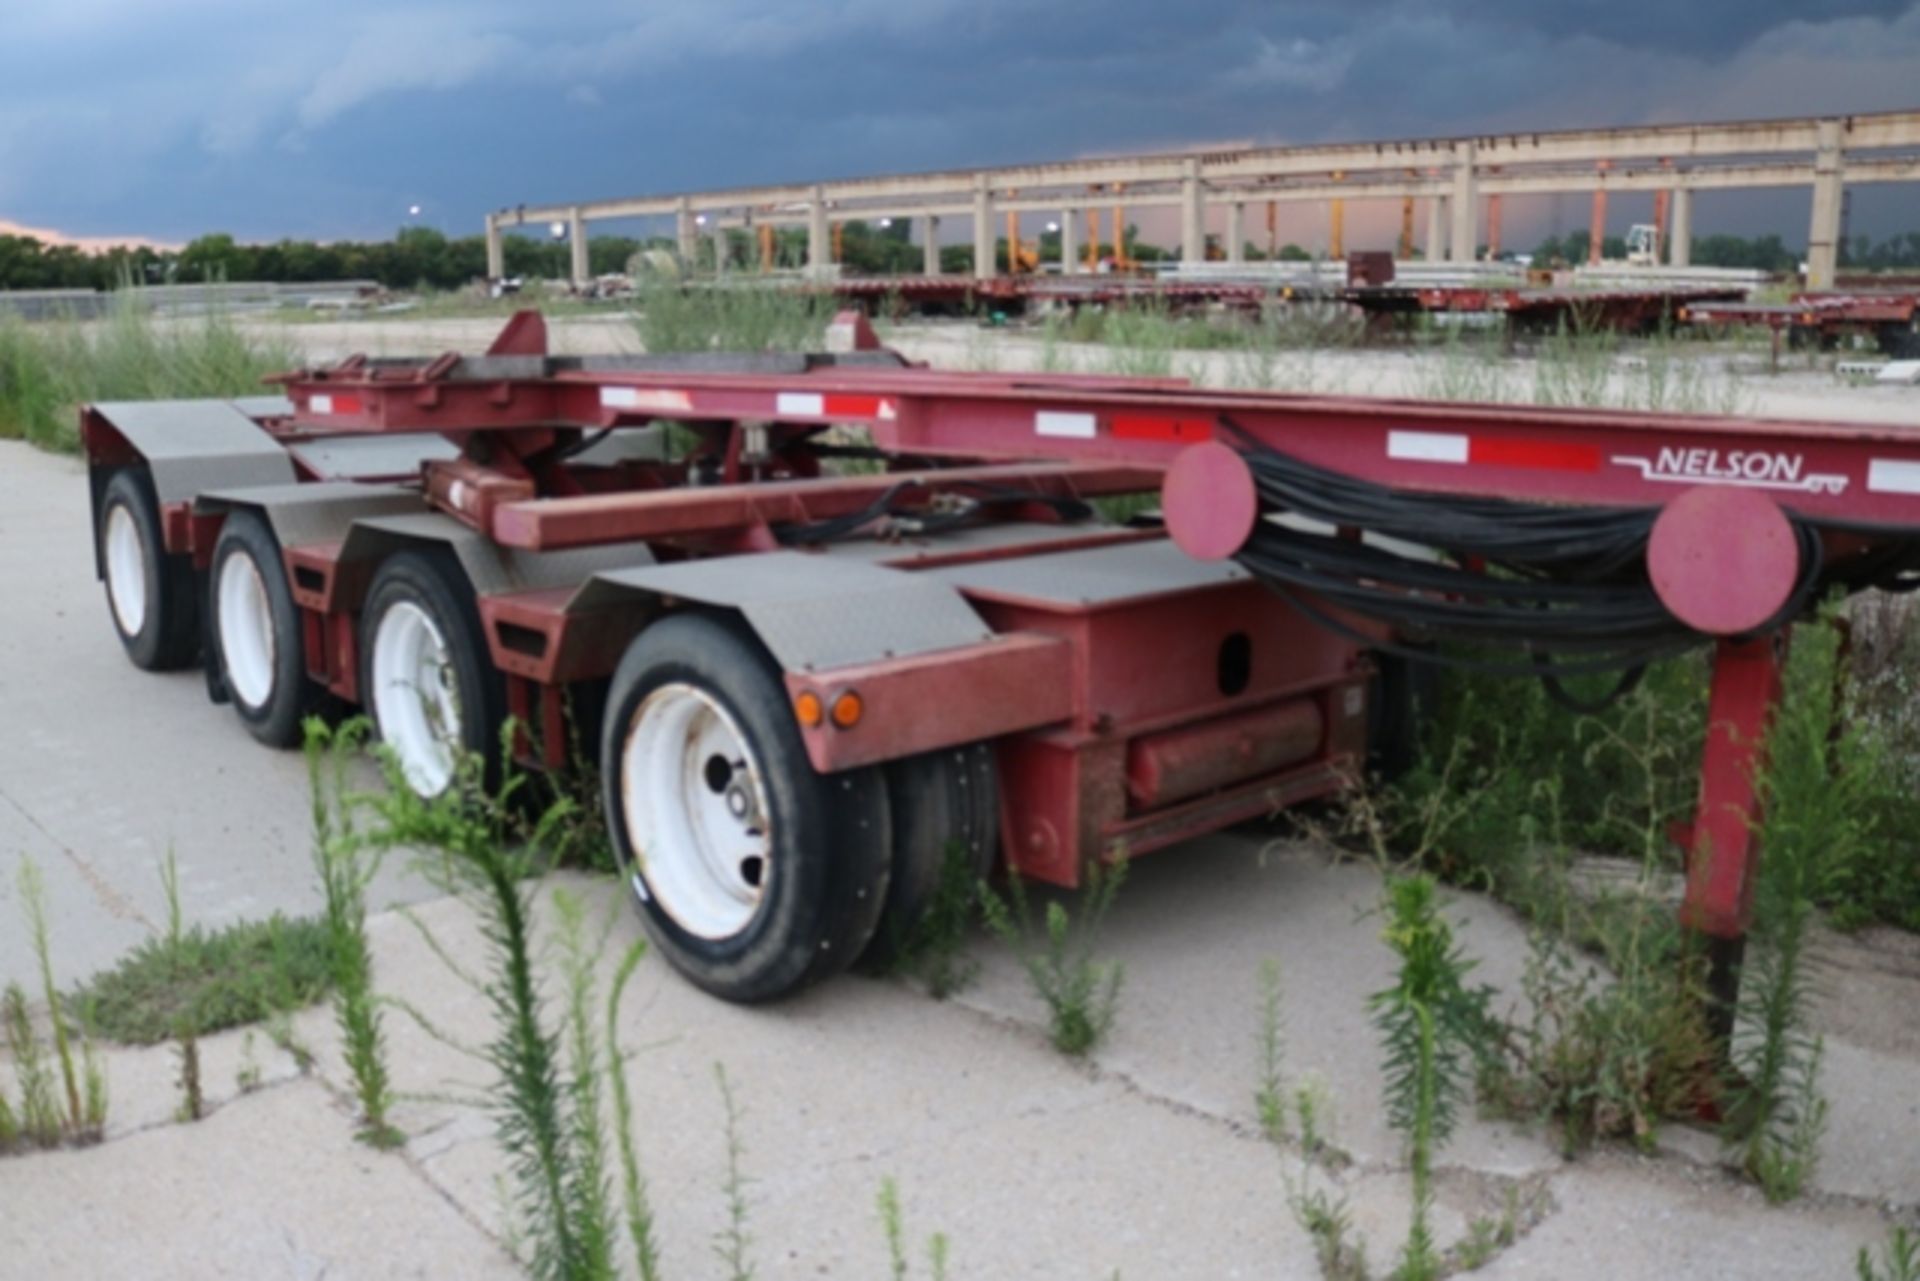 2004 Nelson ART-30P6 steerable pole trailer - 30' length - self contained power plant - Vanguard - Image 2 of 3